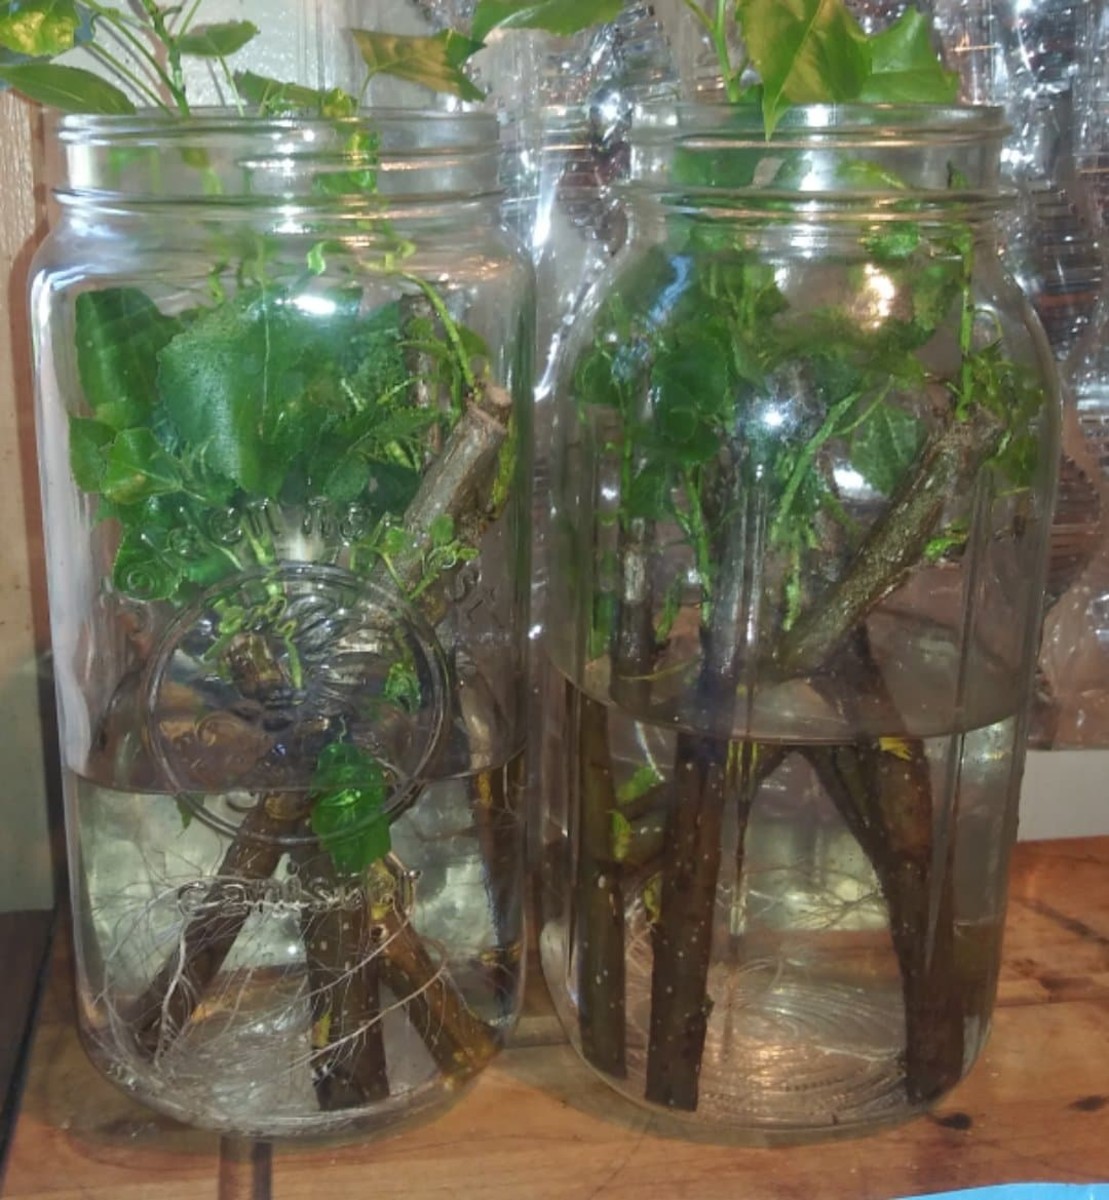 Place cuttings in clear jars with three inches of water.